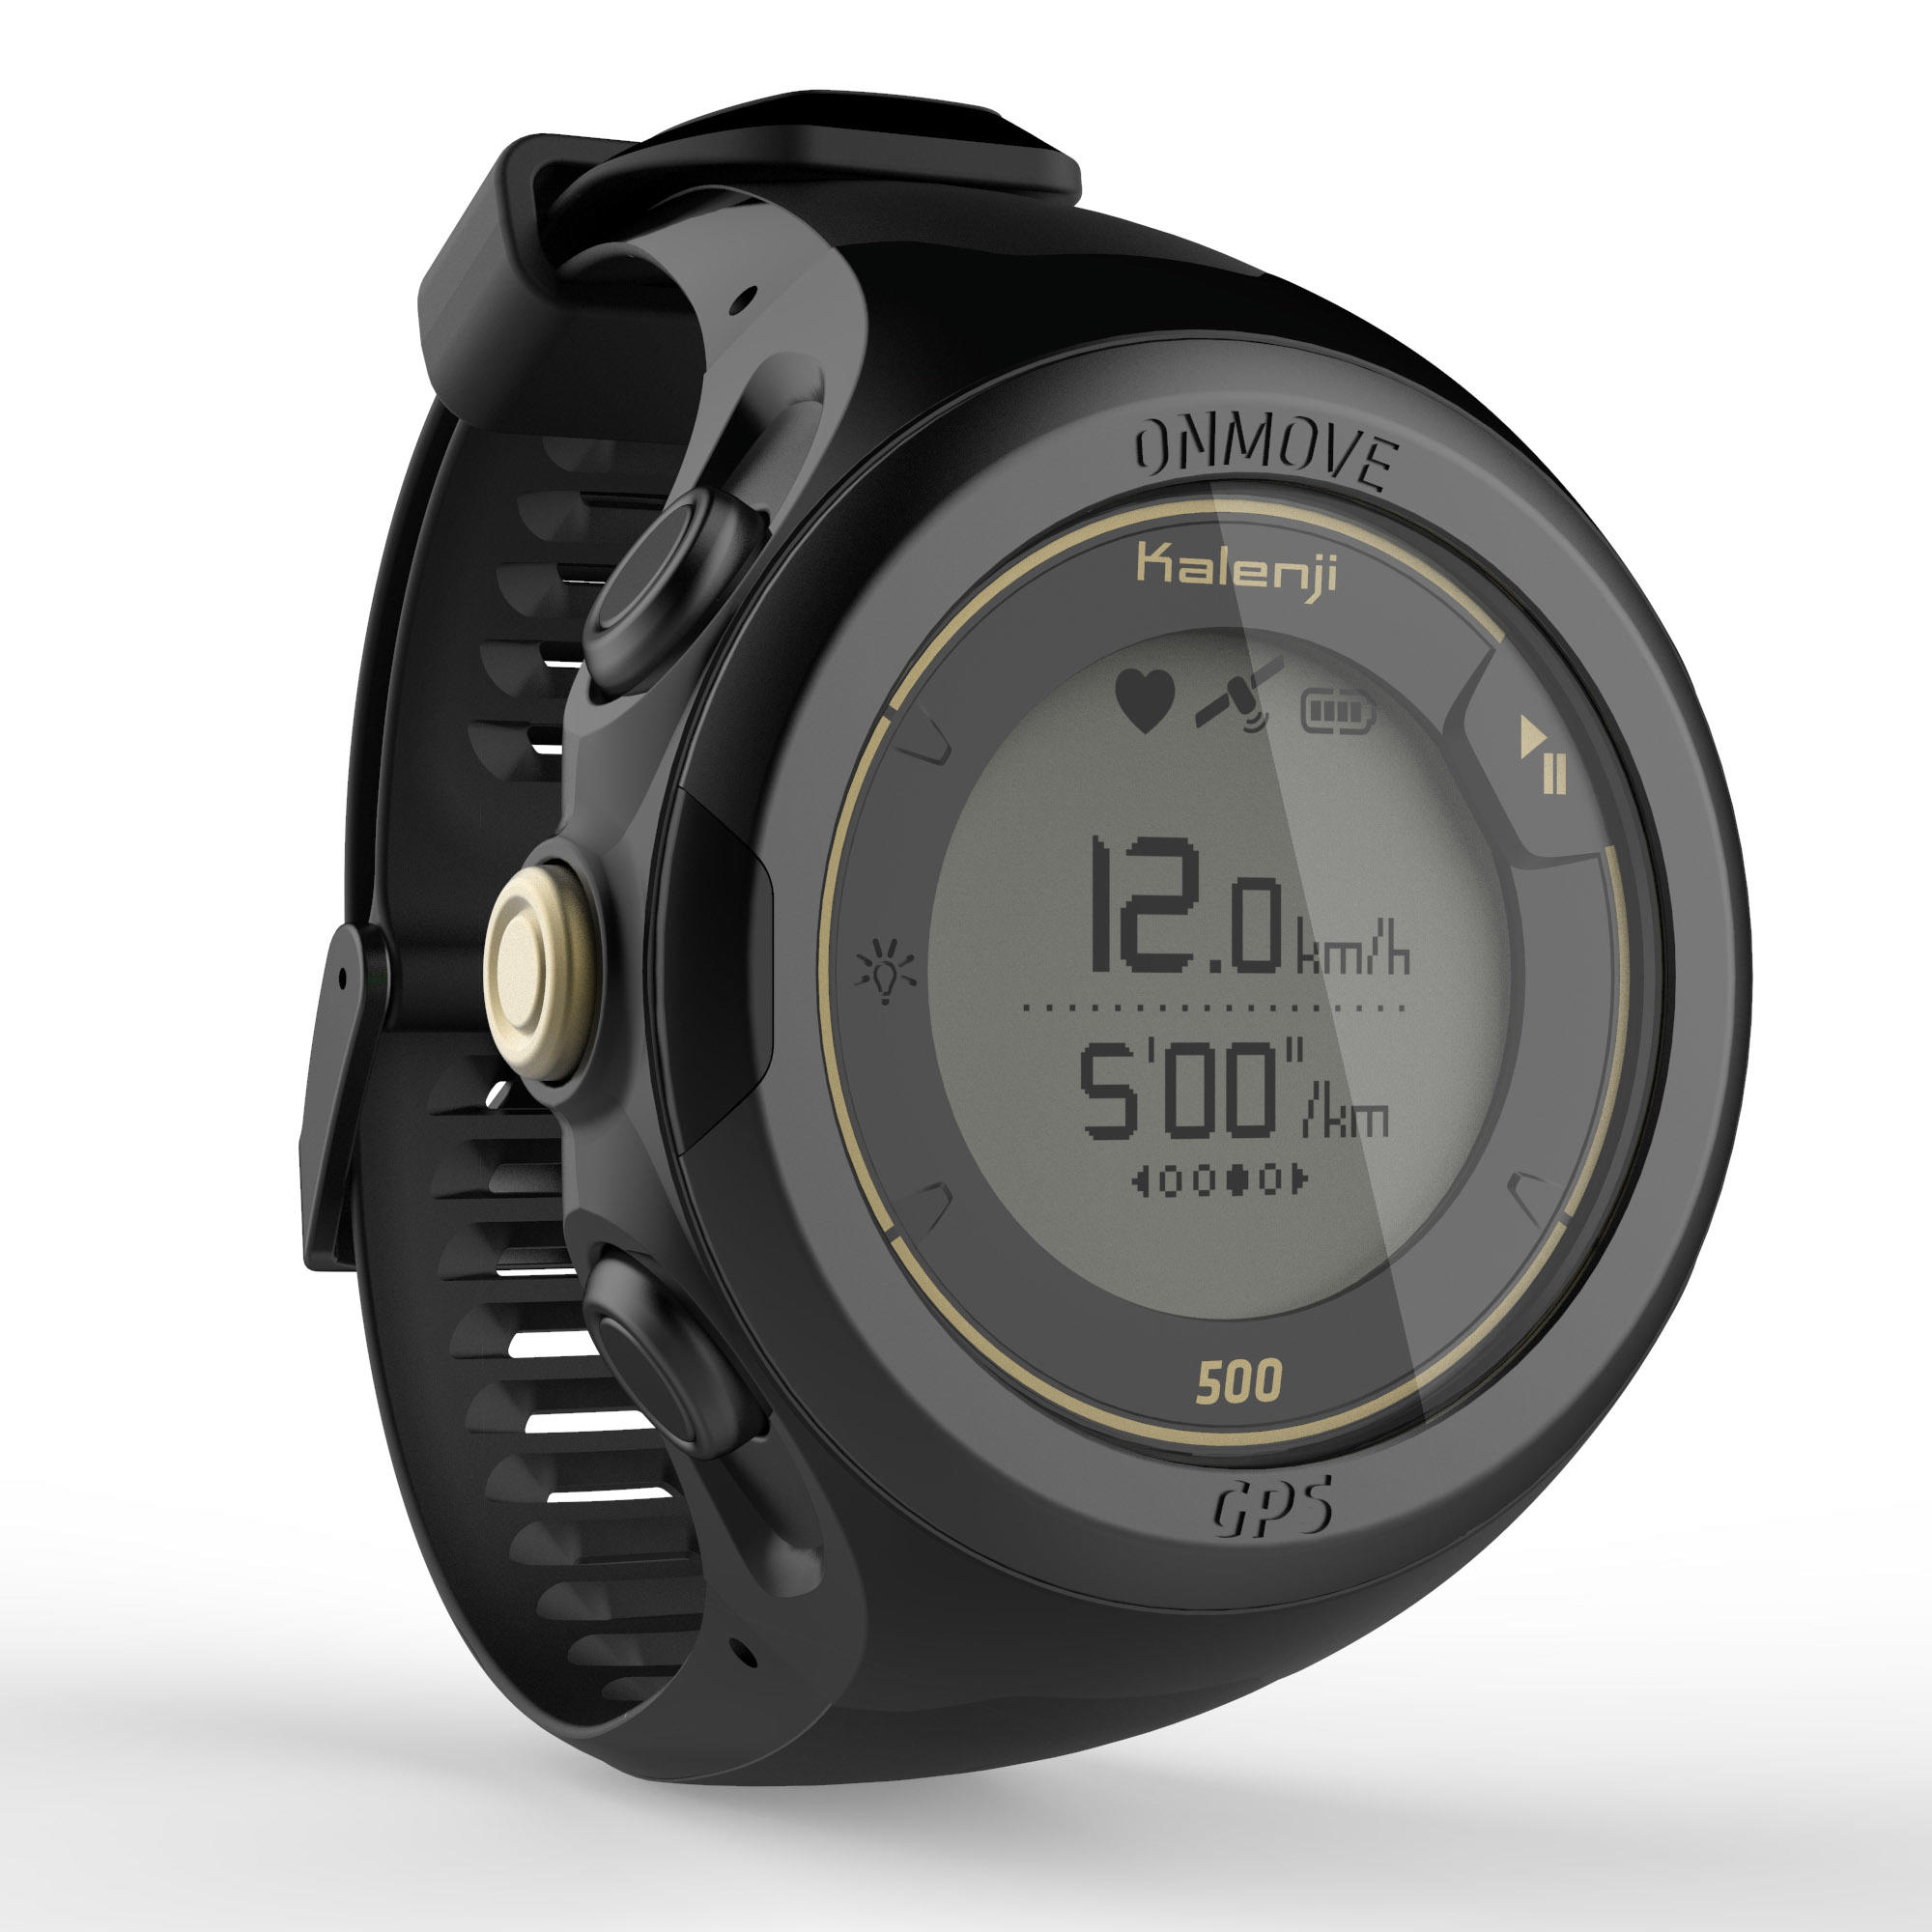 KIPRUN ONmove 500 GPS running watch and wrist heart rate monitor - limited edition gold